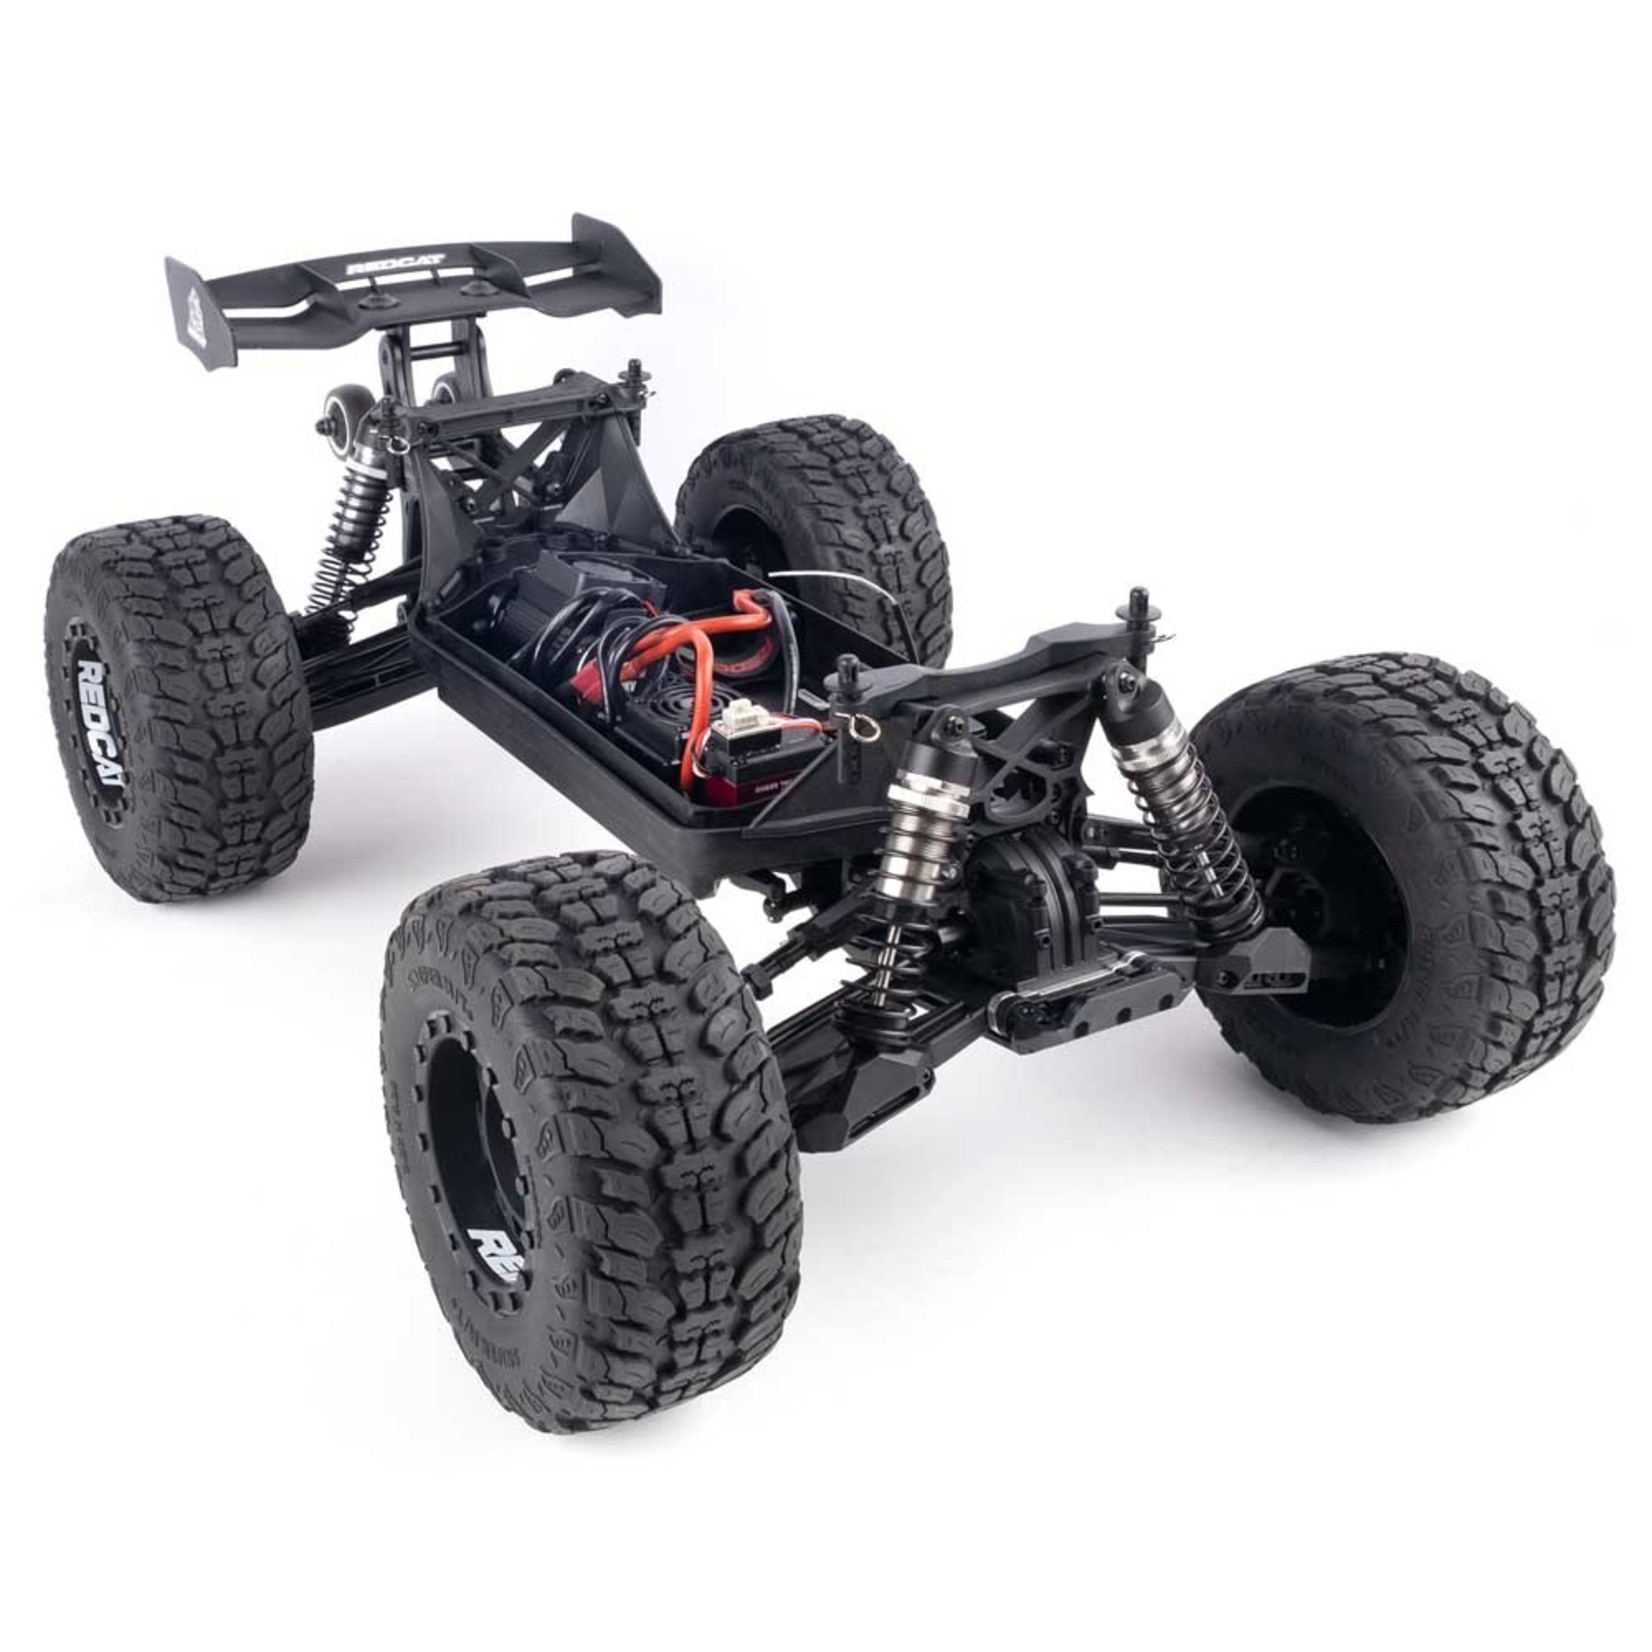 Redcat Racing KAIJU- WHITE : RER14420 Redcat KAIJU EXT 1/8 Scale 6S Ready Monster Truck